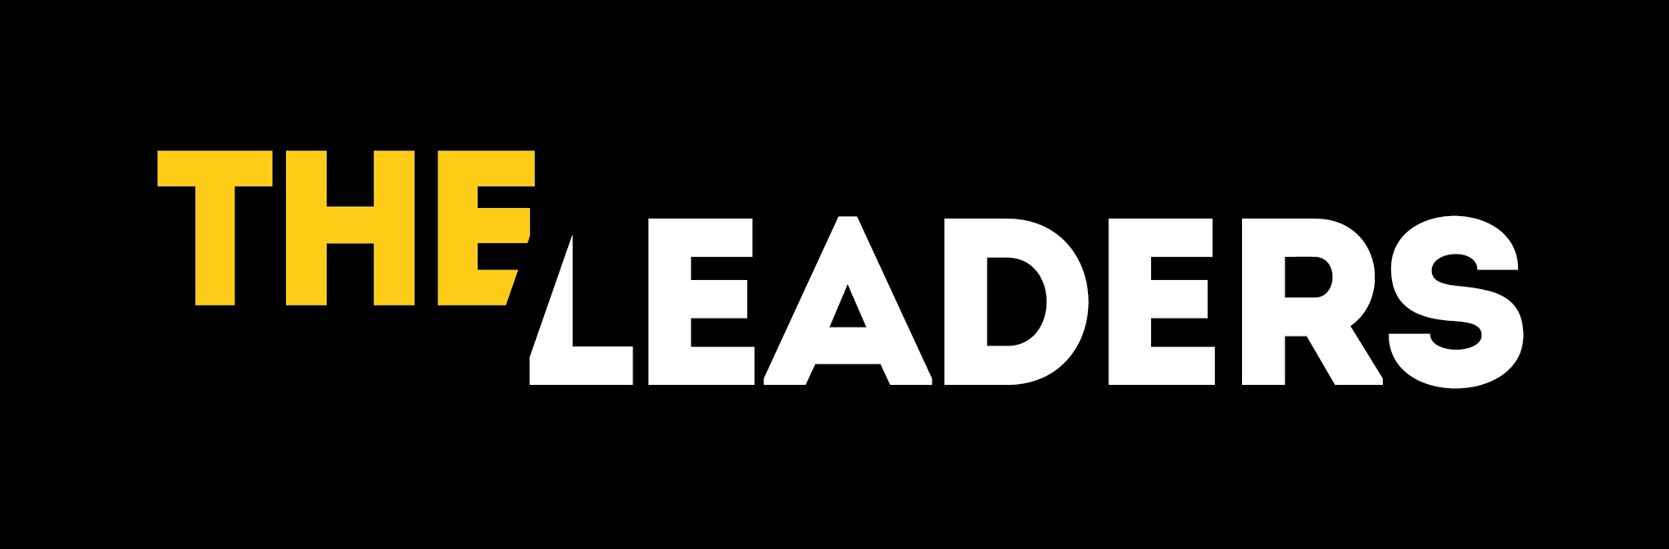 The Leaders logo